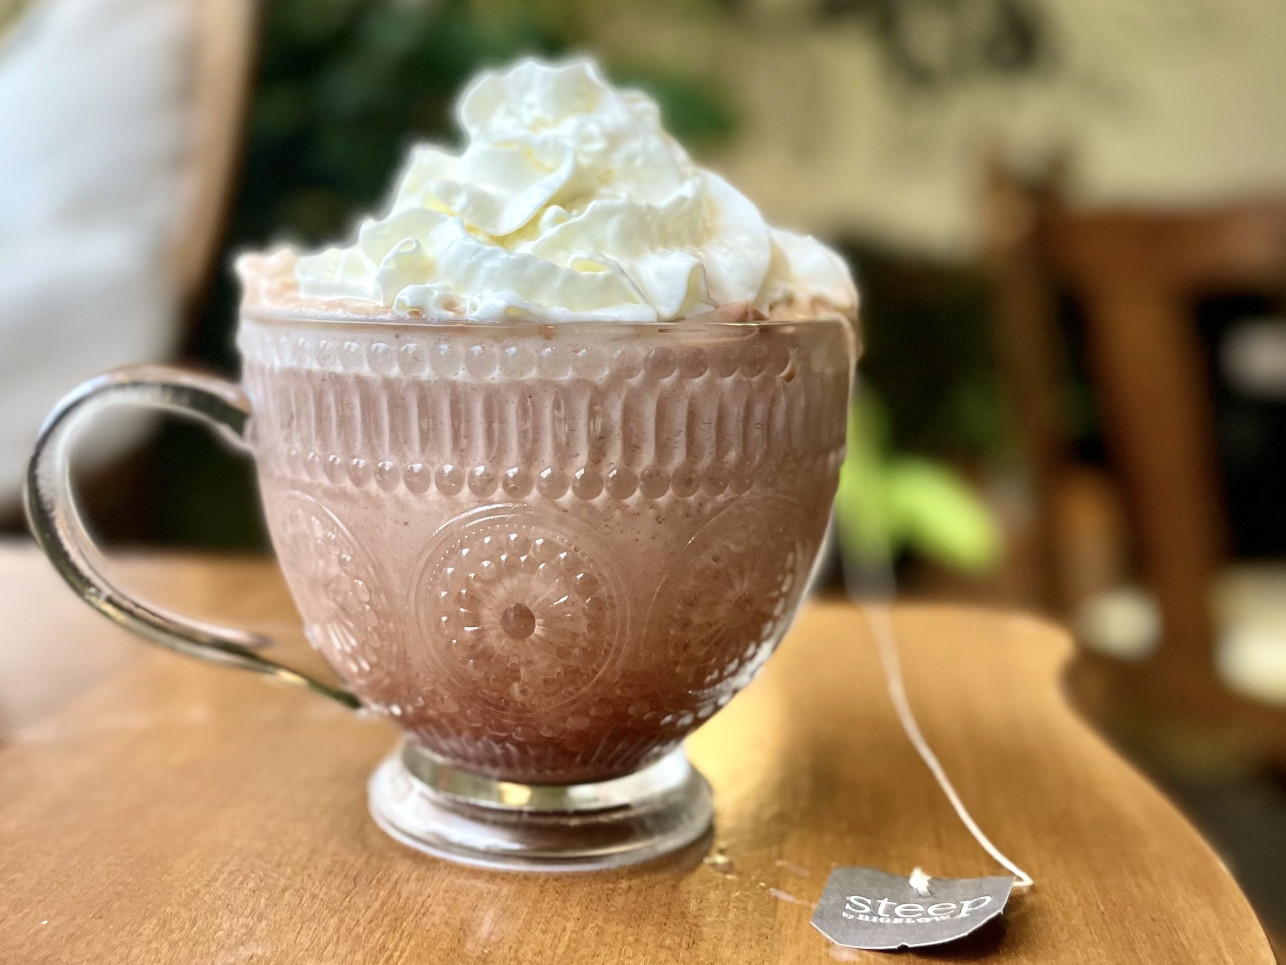 EarlGreyHotChocolate provided by Purrista cropped